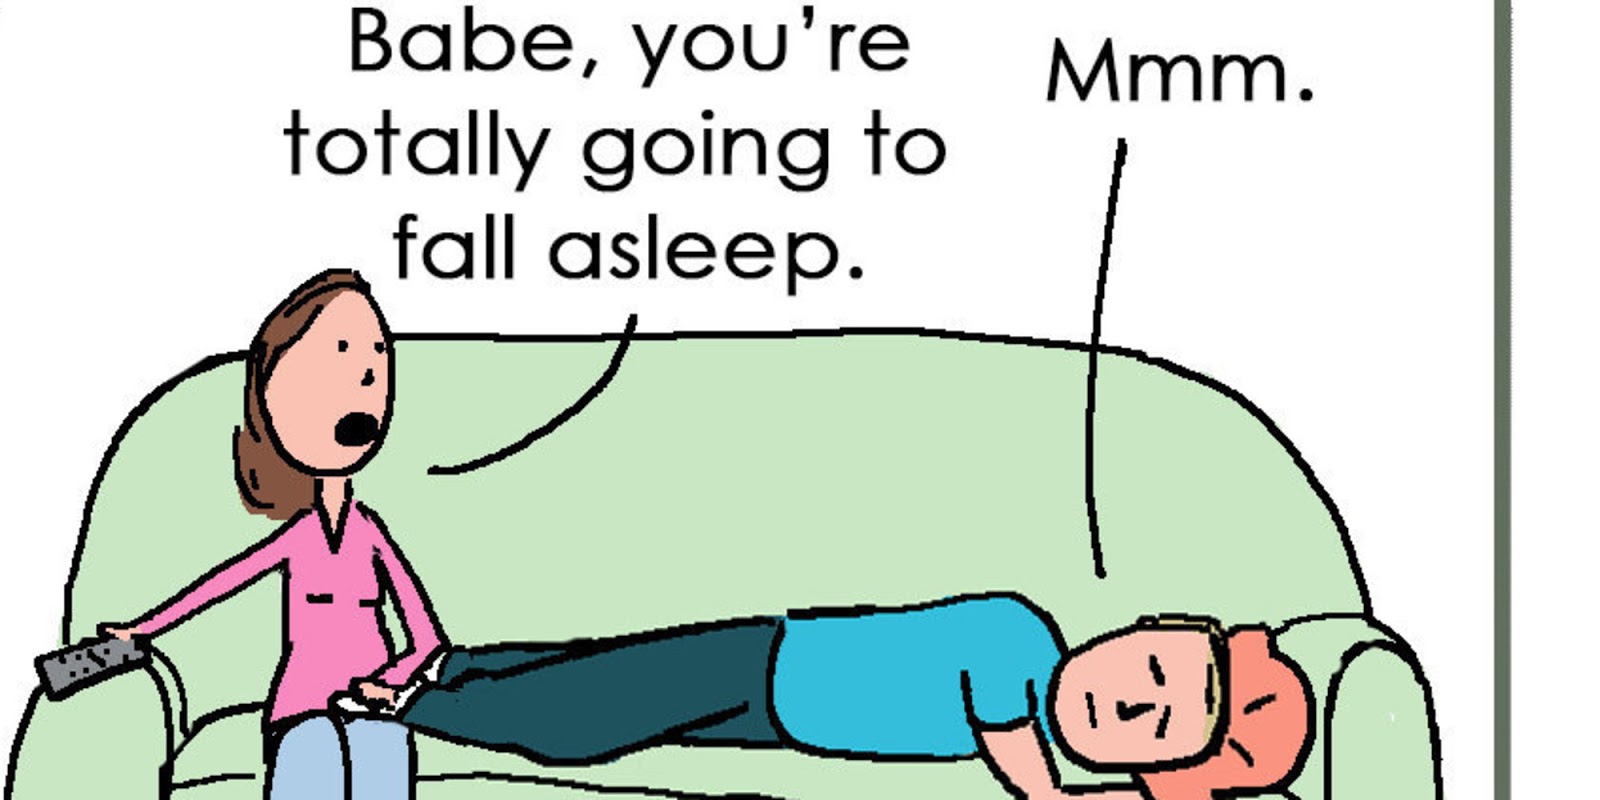 Funny Comic Illustrates The Nightly Routine Of Every Married Couple